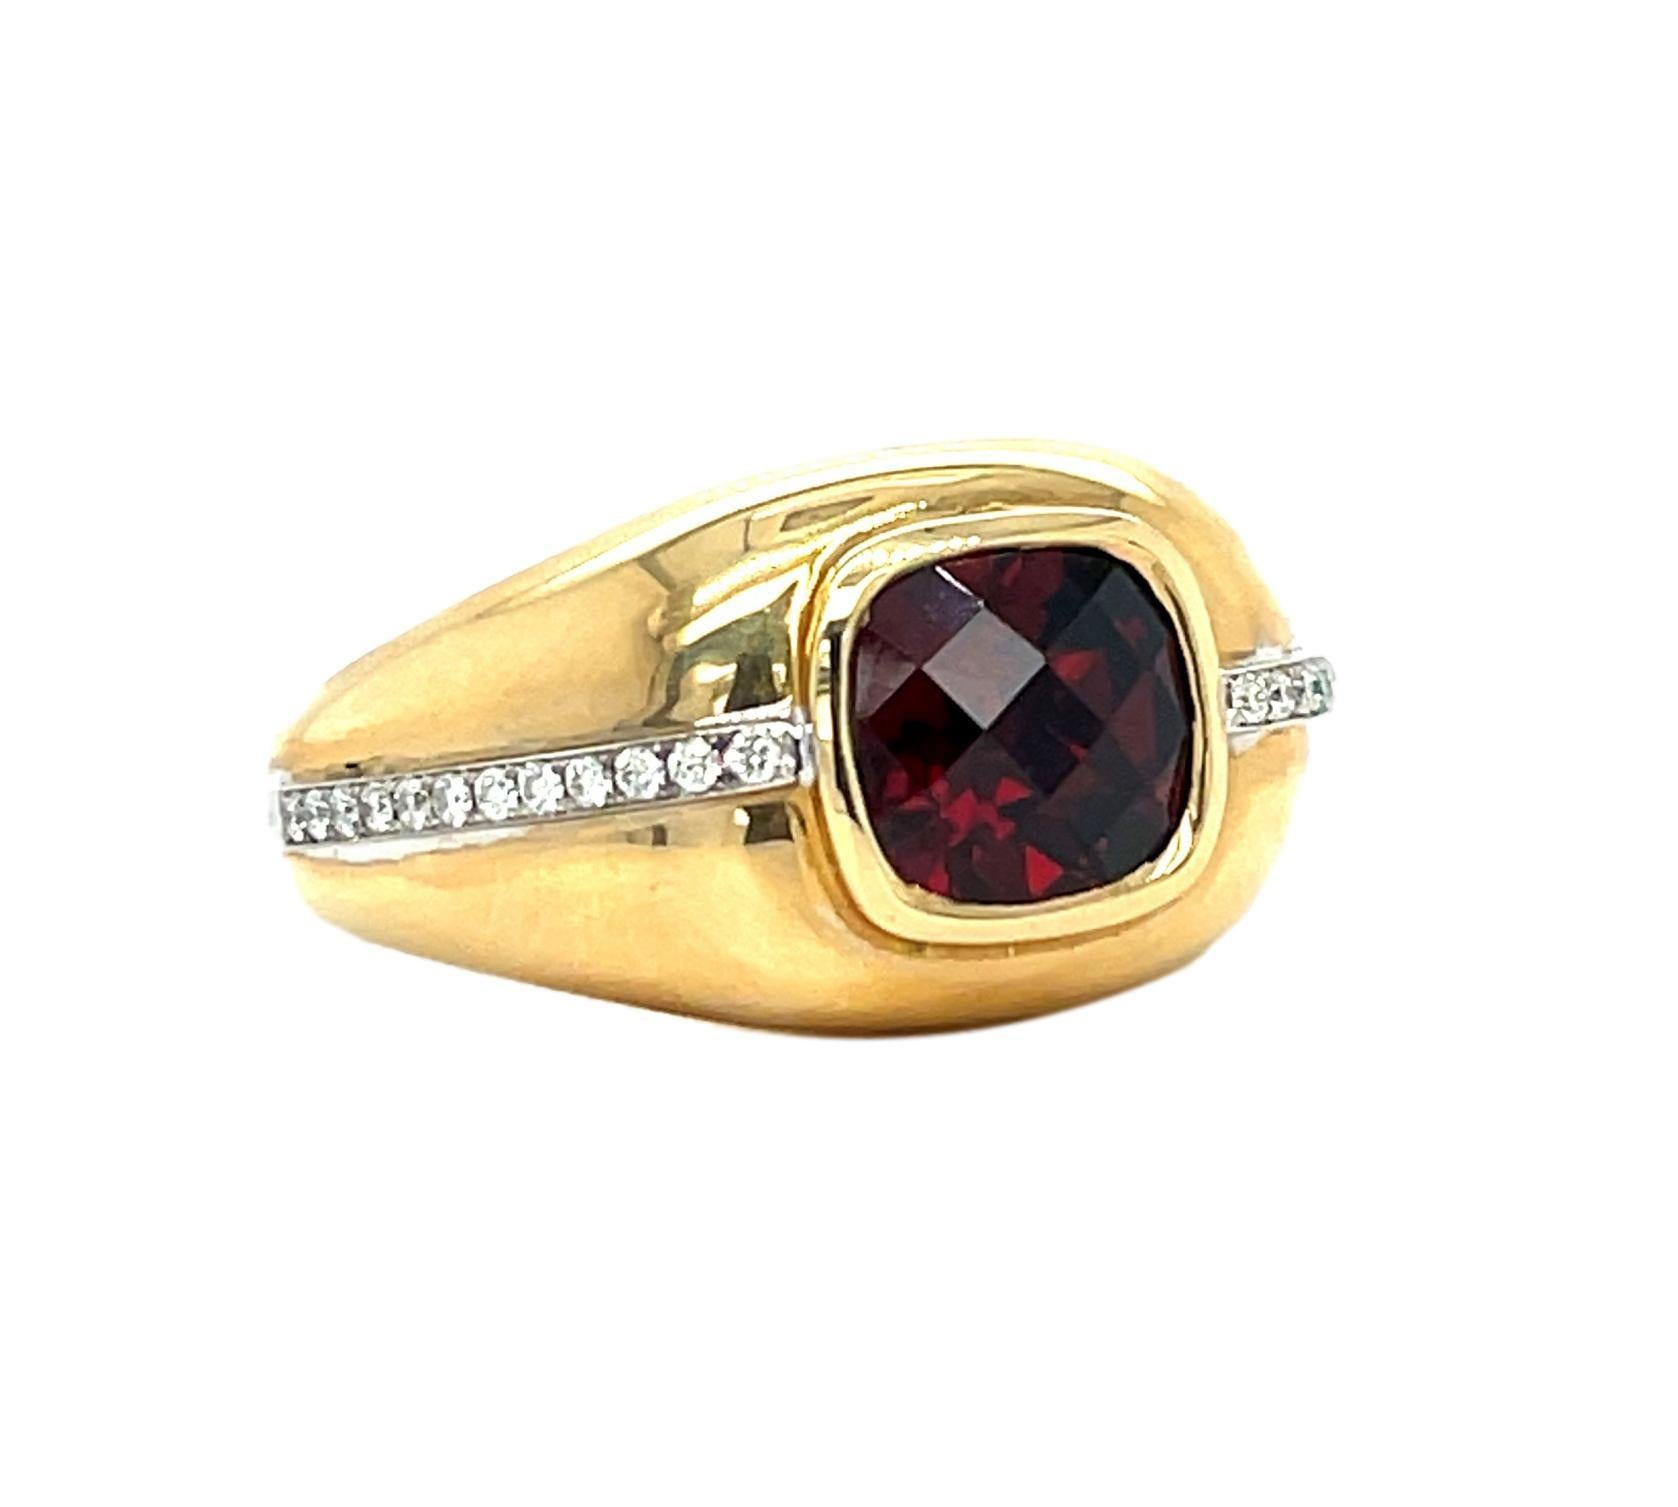 This stunning Men's ring has a cushion cut checkerboard top quality Garnet center with 12 brilliant cut diamonds on each side of the center stone. The ring is set in 14K yellow gold. It comes in a beautiful box ready for the perfect gift!

14KY:    